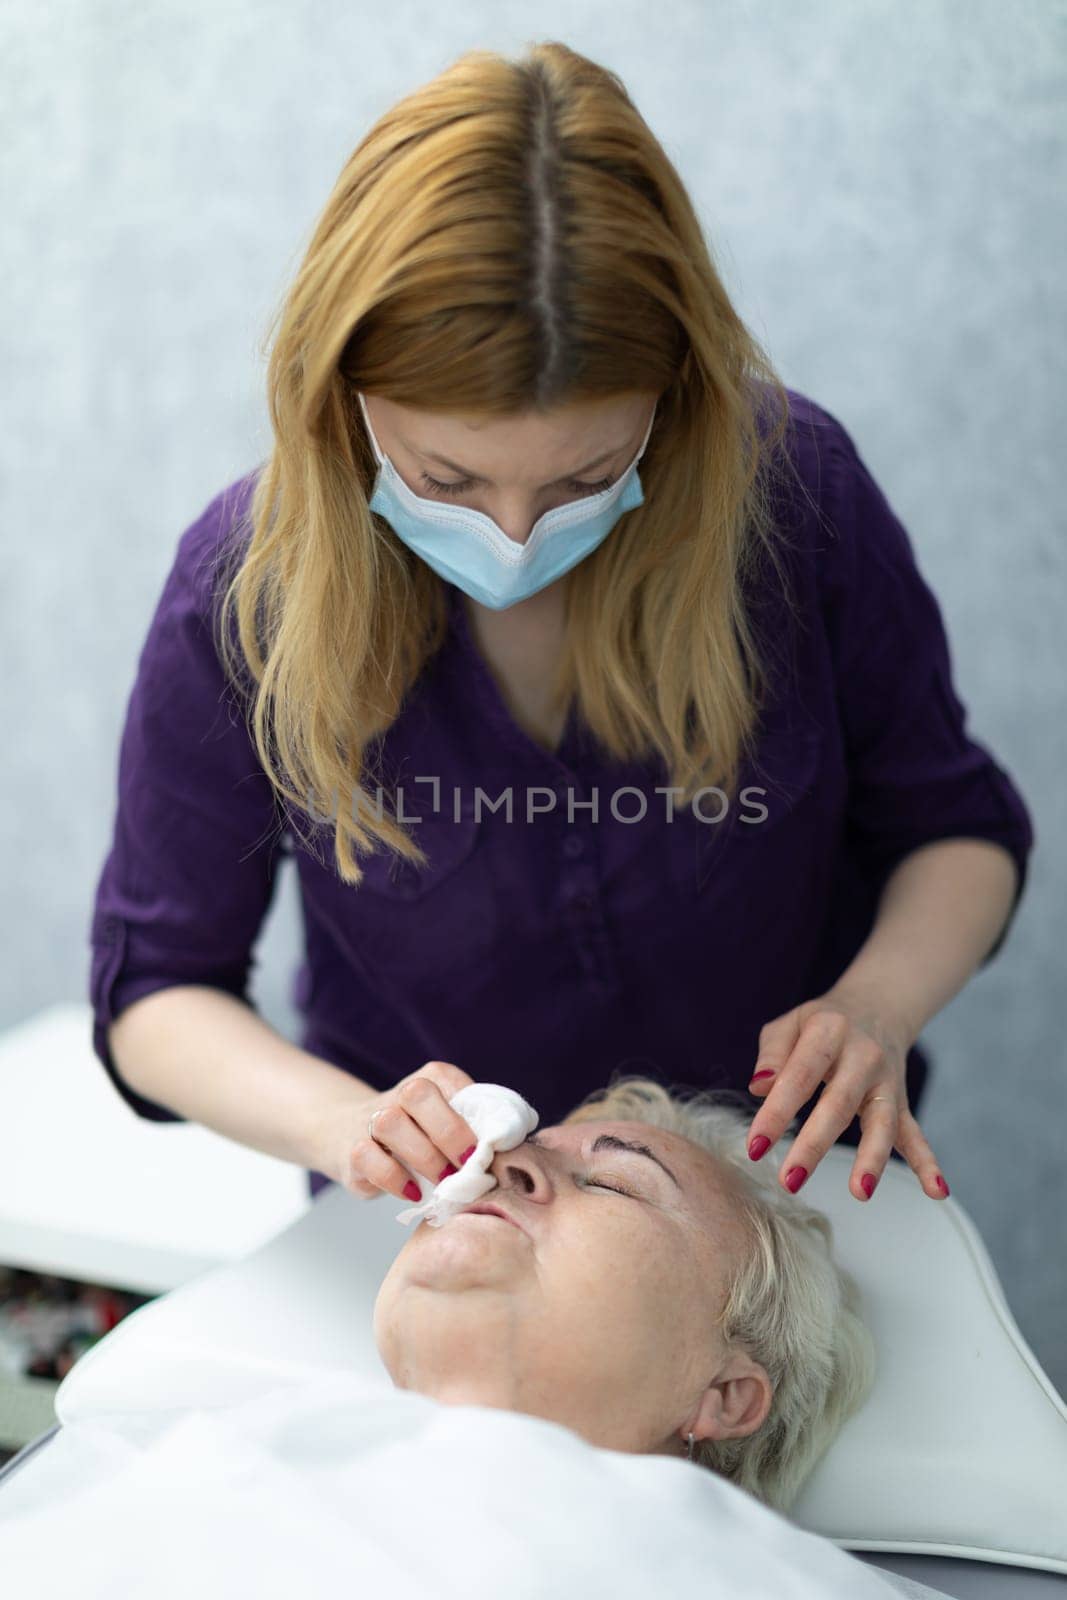 A patient of an aesthetic clinic is lying on a bed and talking to a cosmetologist standing next to her.